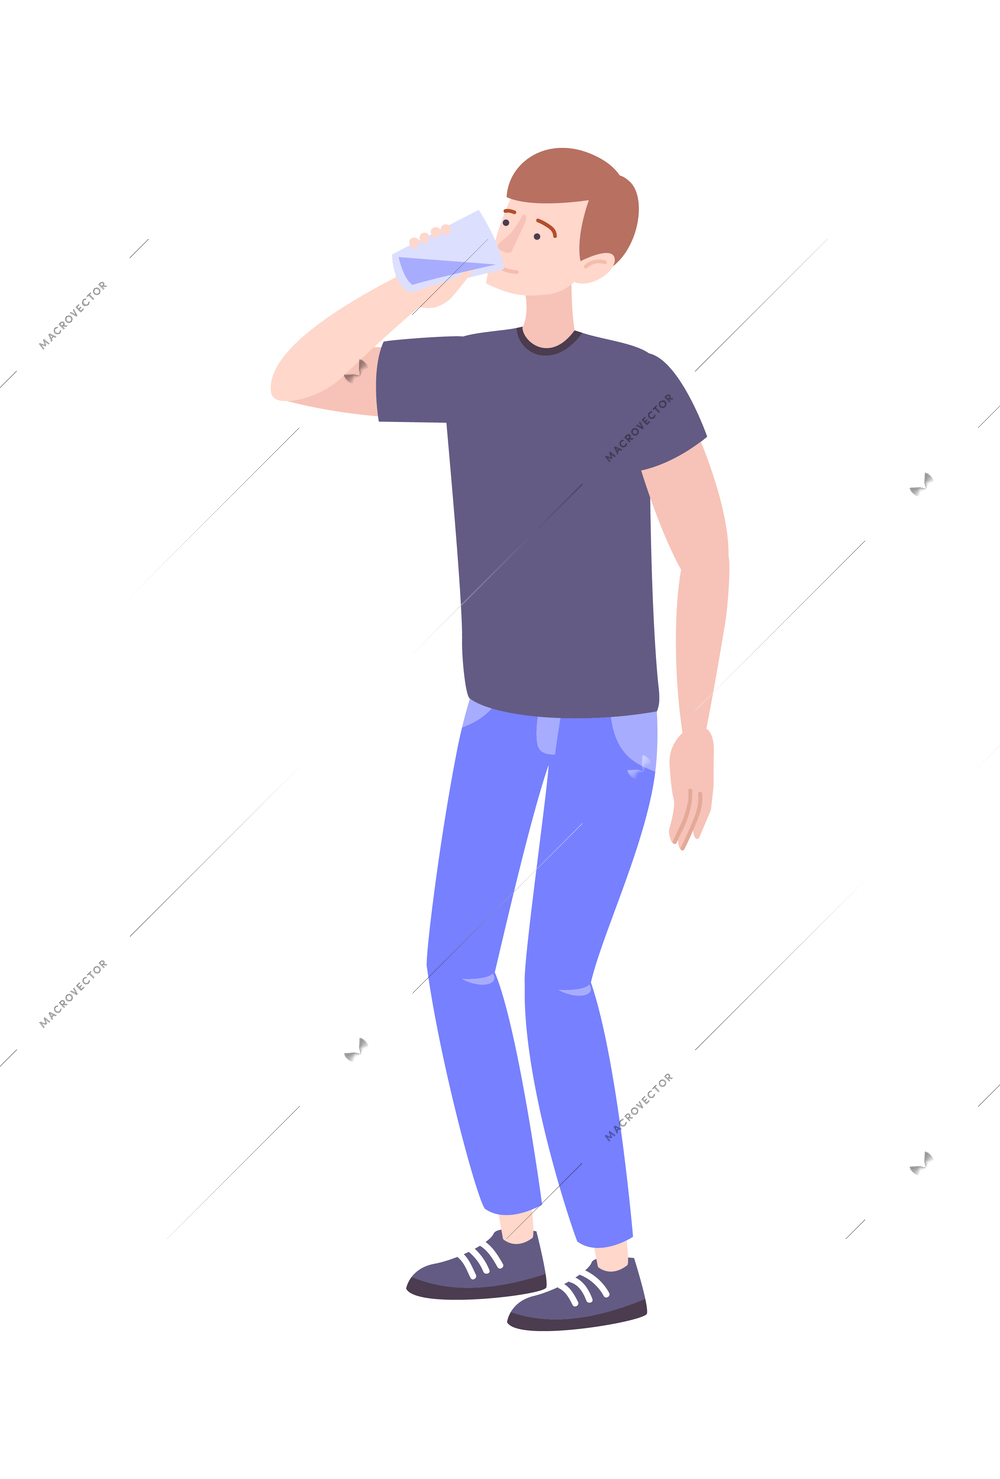 Flat icon with man drinking water from glass vector illustration